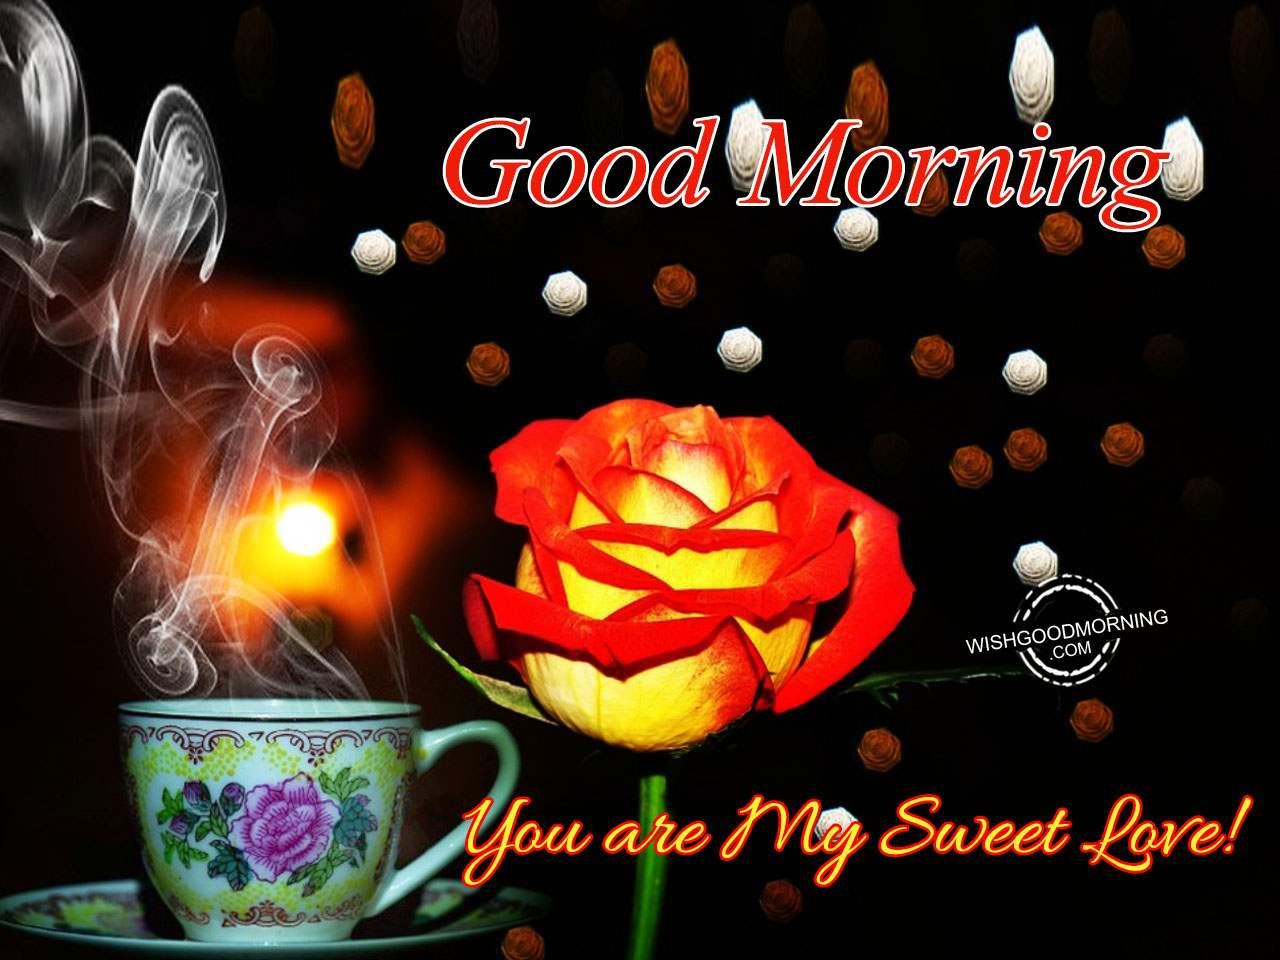 Good Morning Wishes For Husband - Good Morning Pictures ...